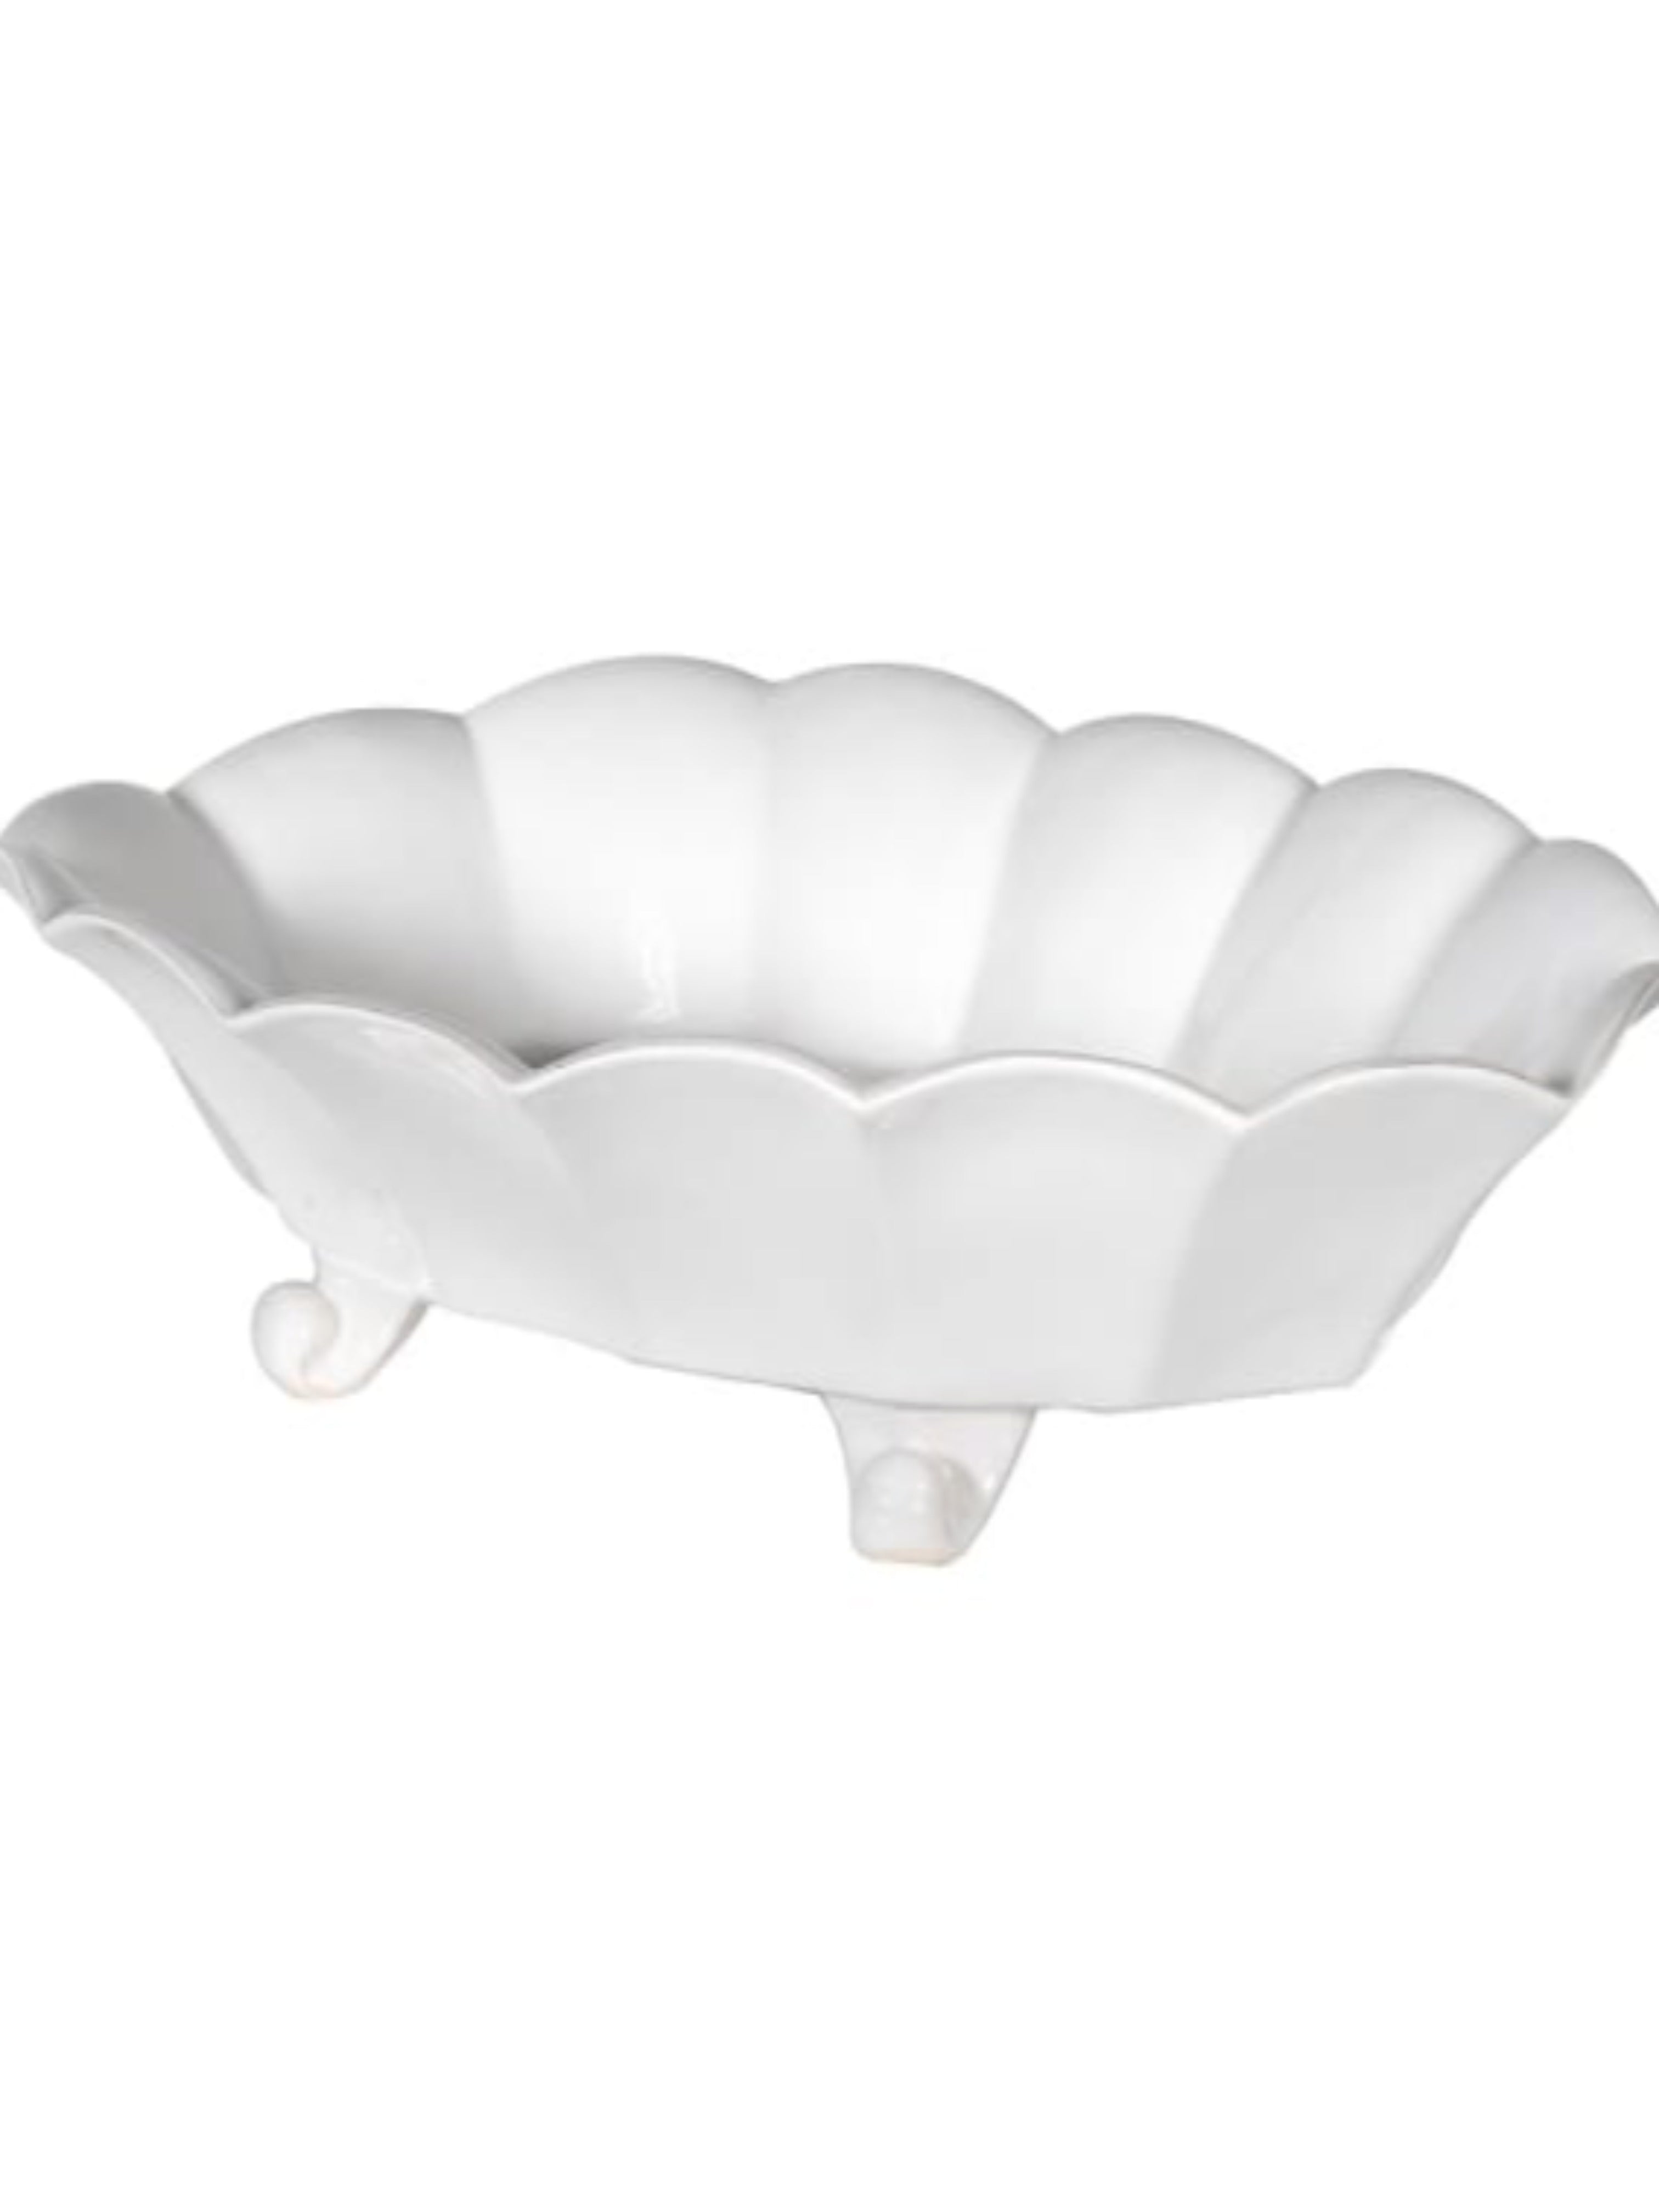 White Ceramic Oval Footed Dish